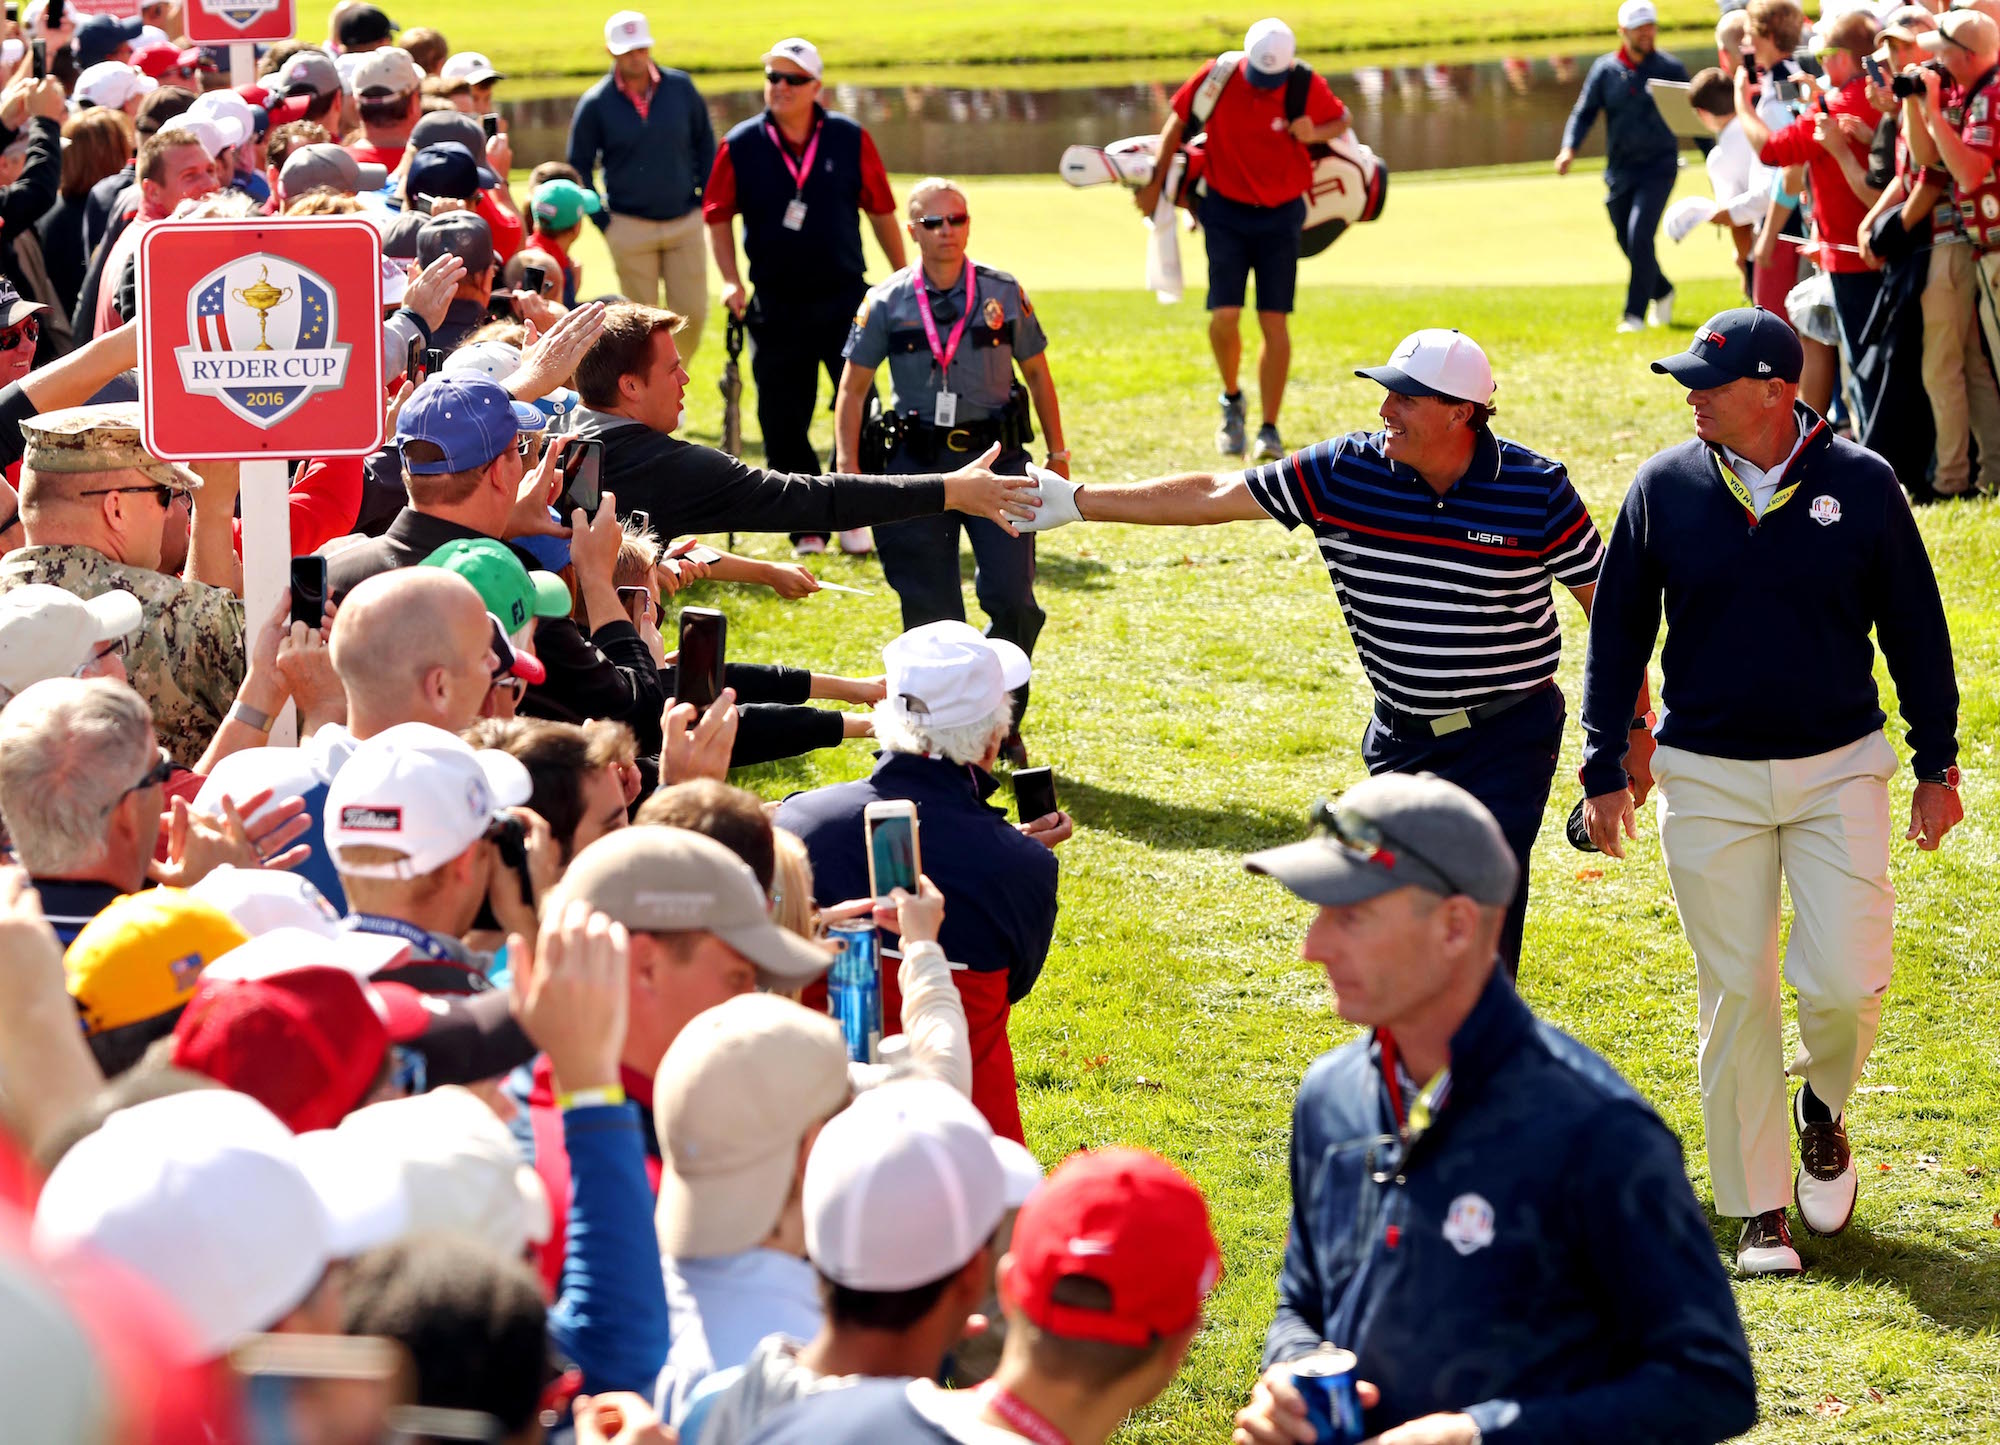 Sep 29, 2016; Chaska, MN, USA; Phil Mickelson of the United States greets fans on the 15th green during a practice round for the 41st Ryder Cup at Hazeltine National Golf Club. Mandatory Credit: Rob Schumacher-USA TODAY Sports